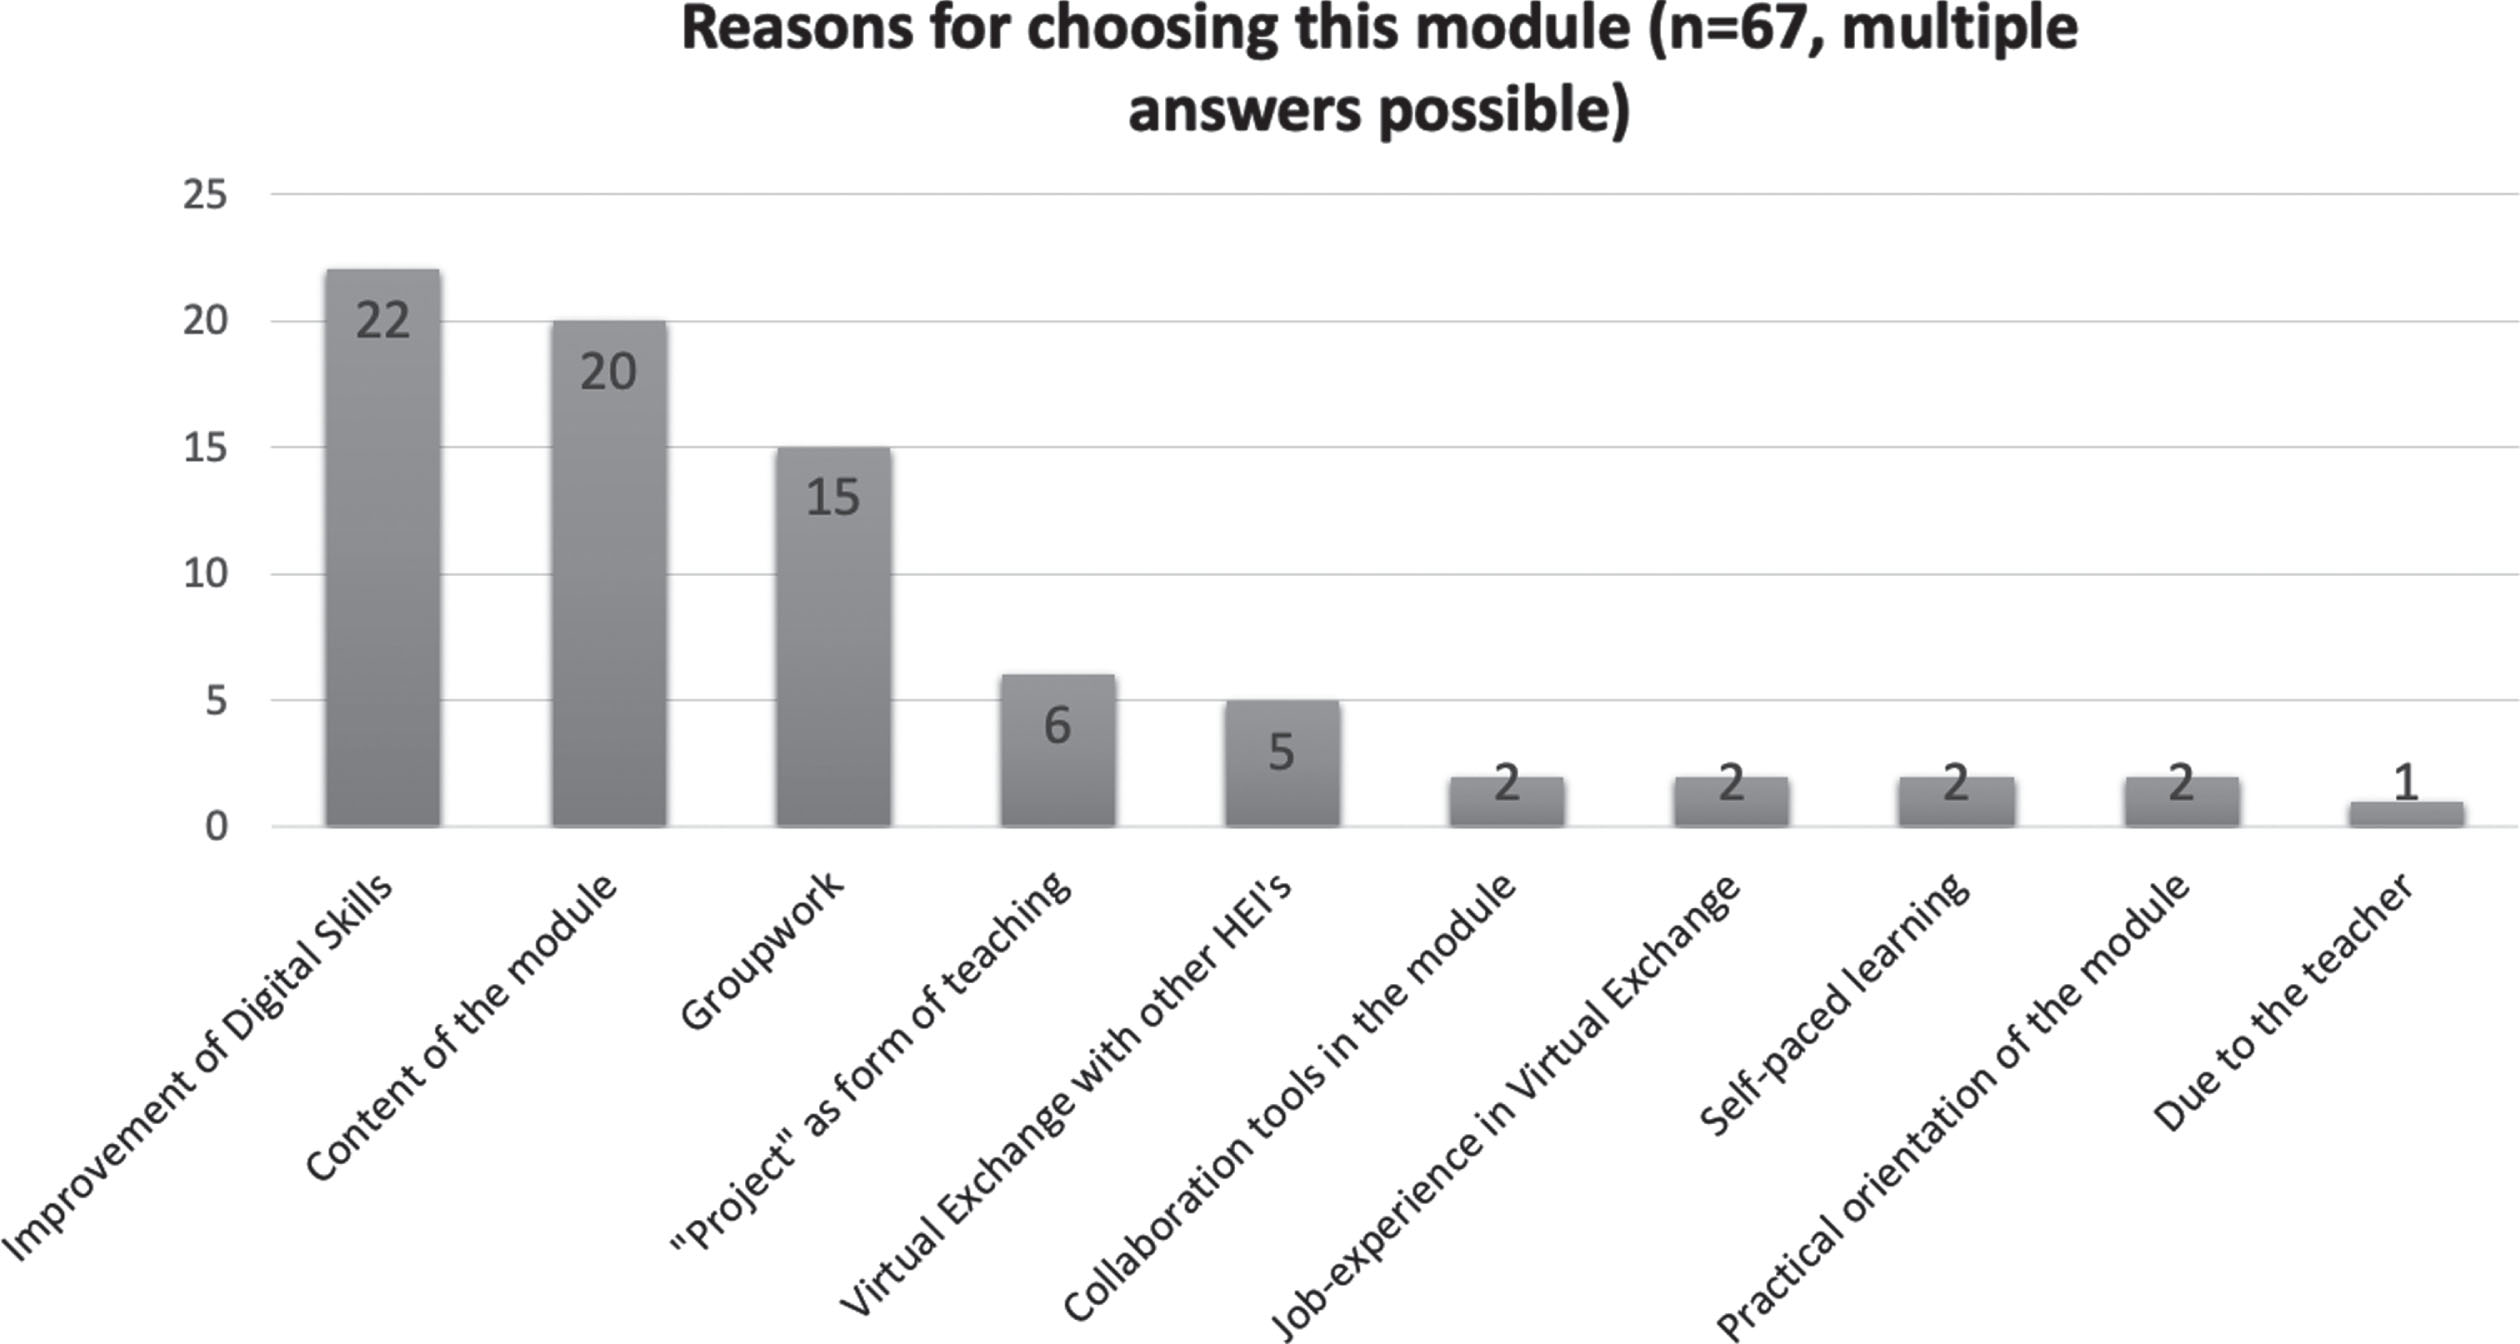 Results from preliminary survey: Selection of the module.